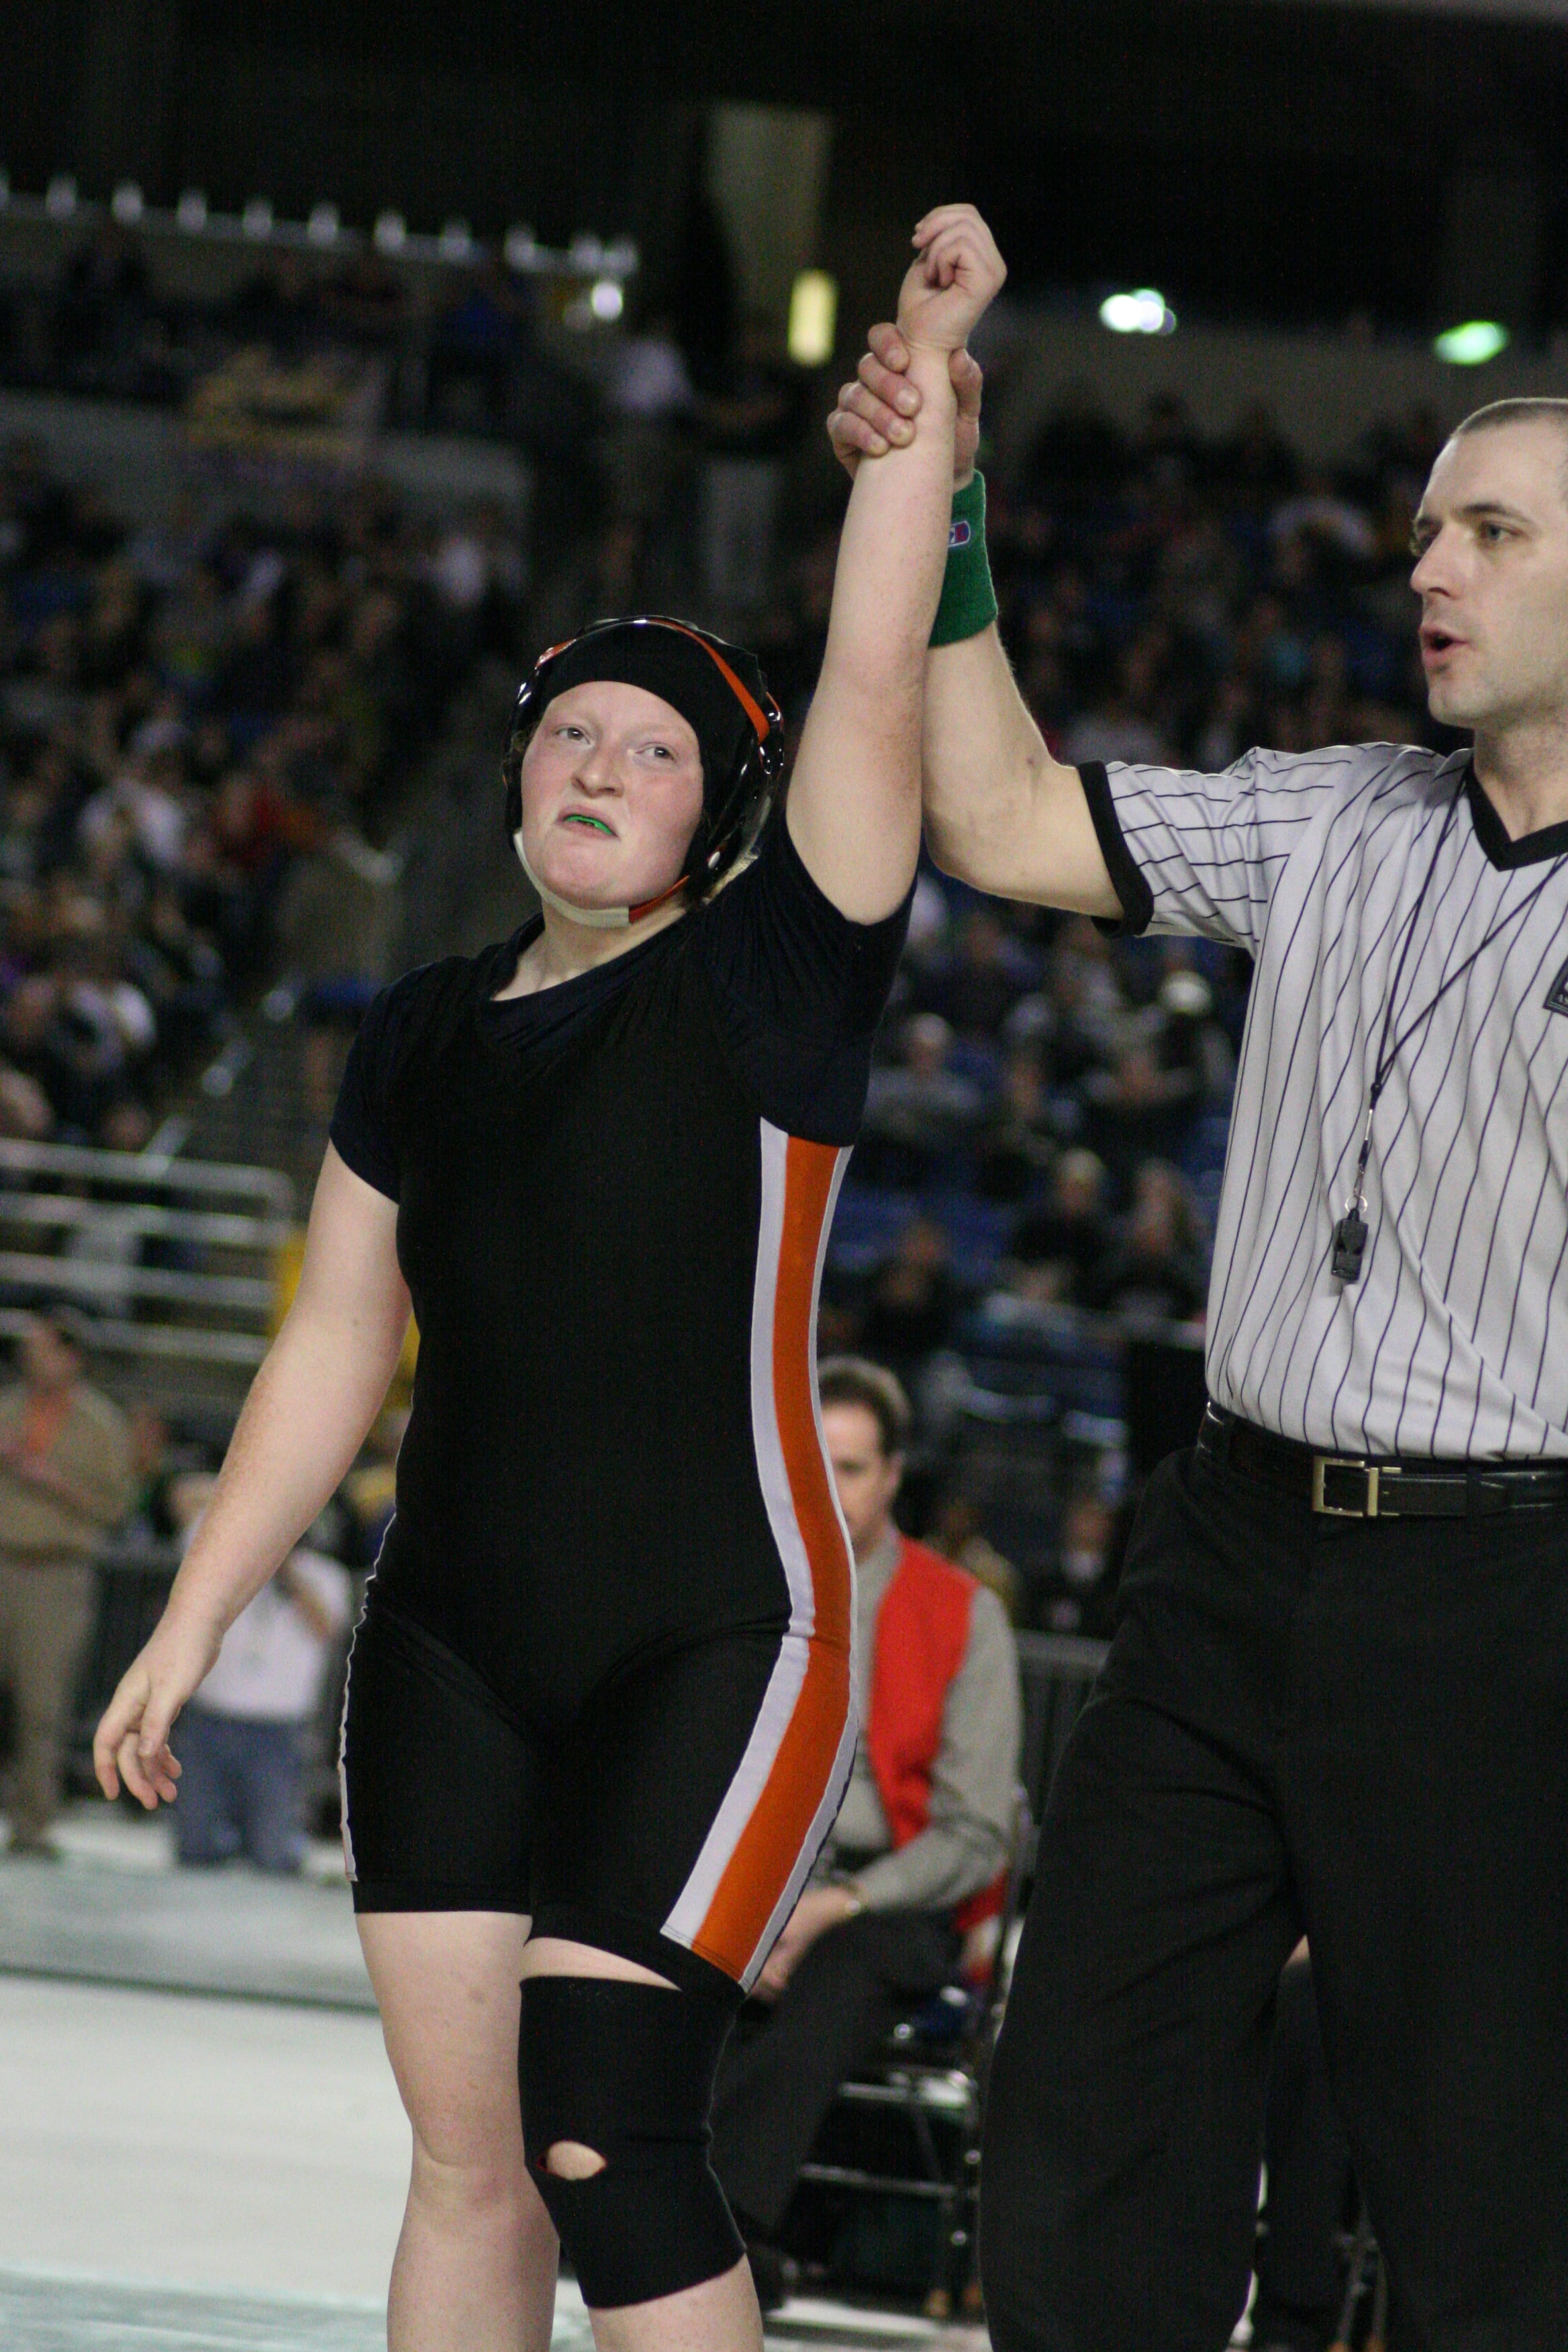 Abby Lees will never forget the thrill of having her hand raised in the state championship match. The Washougal High School sophomore has been dreaming and working hard for that moment for two years.